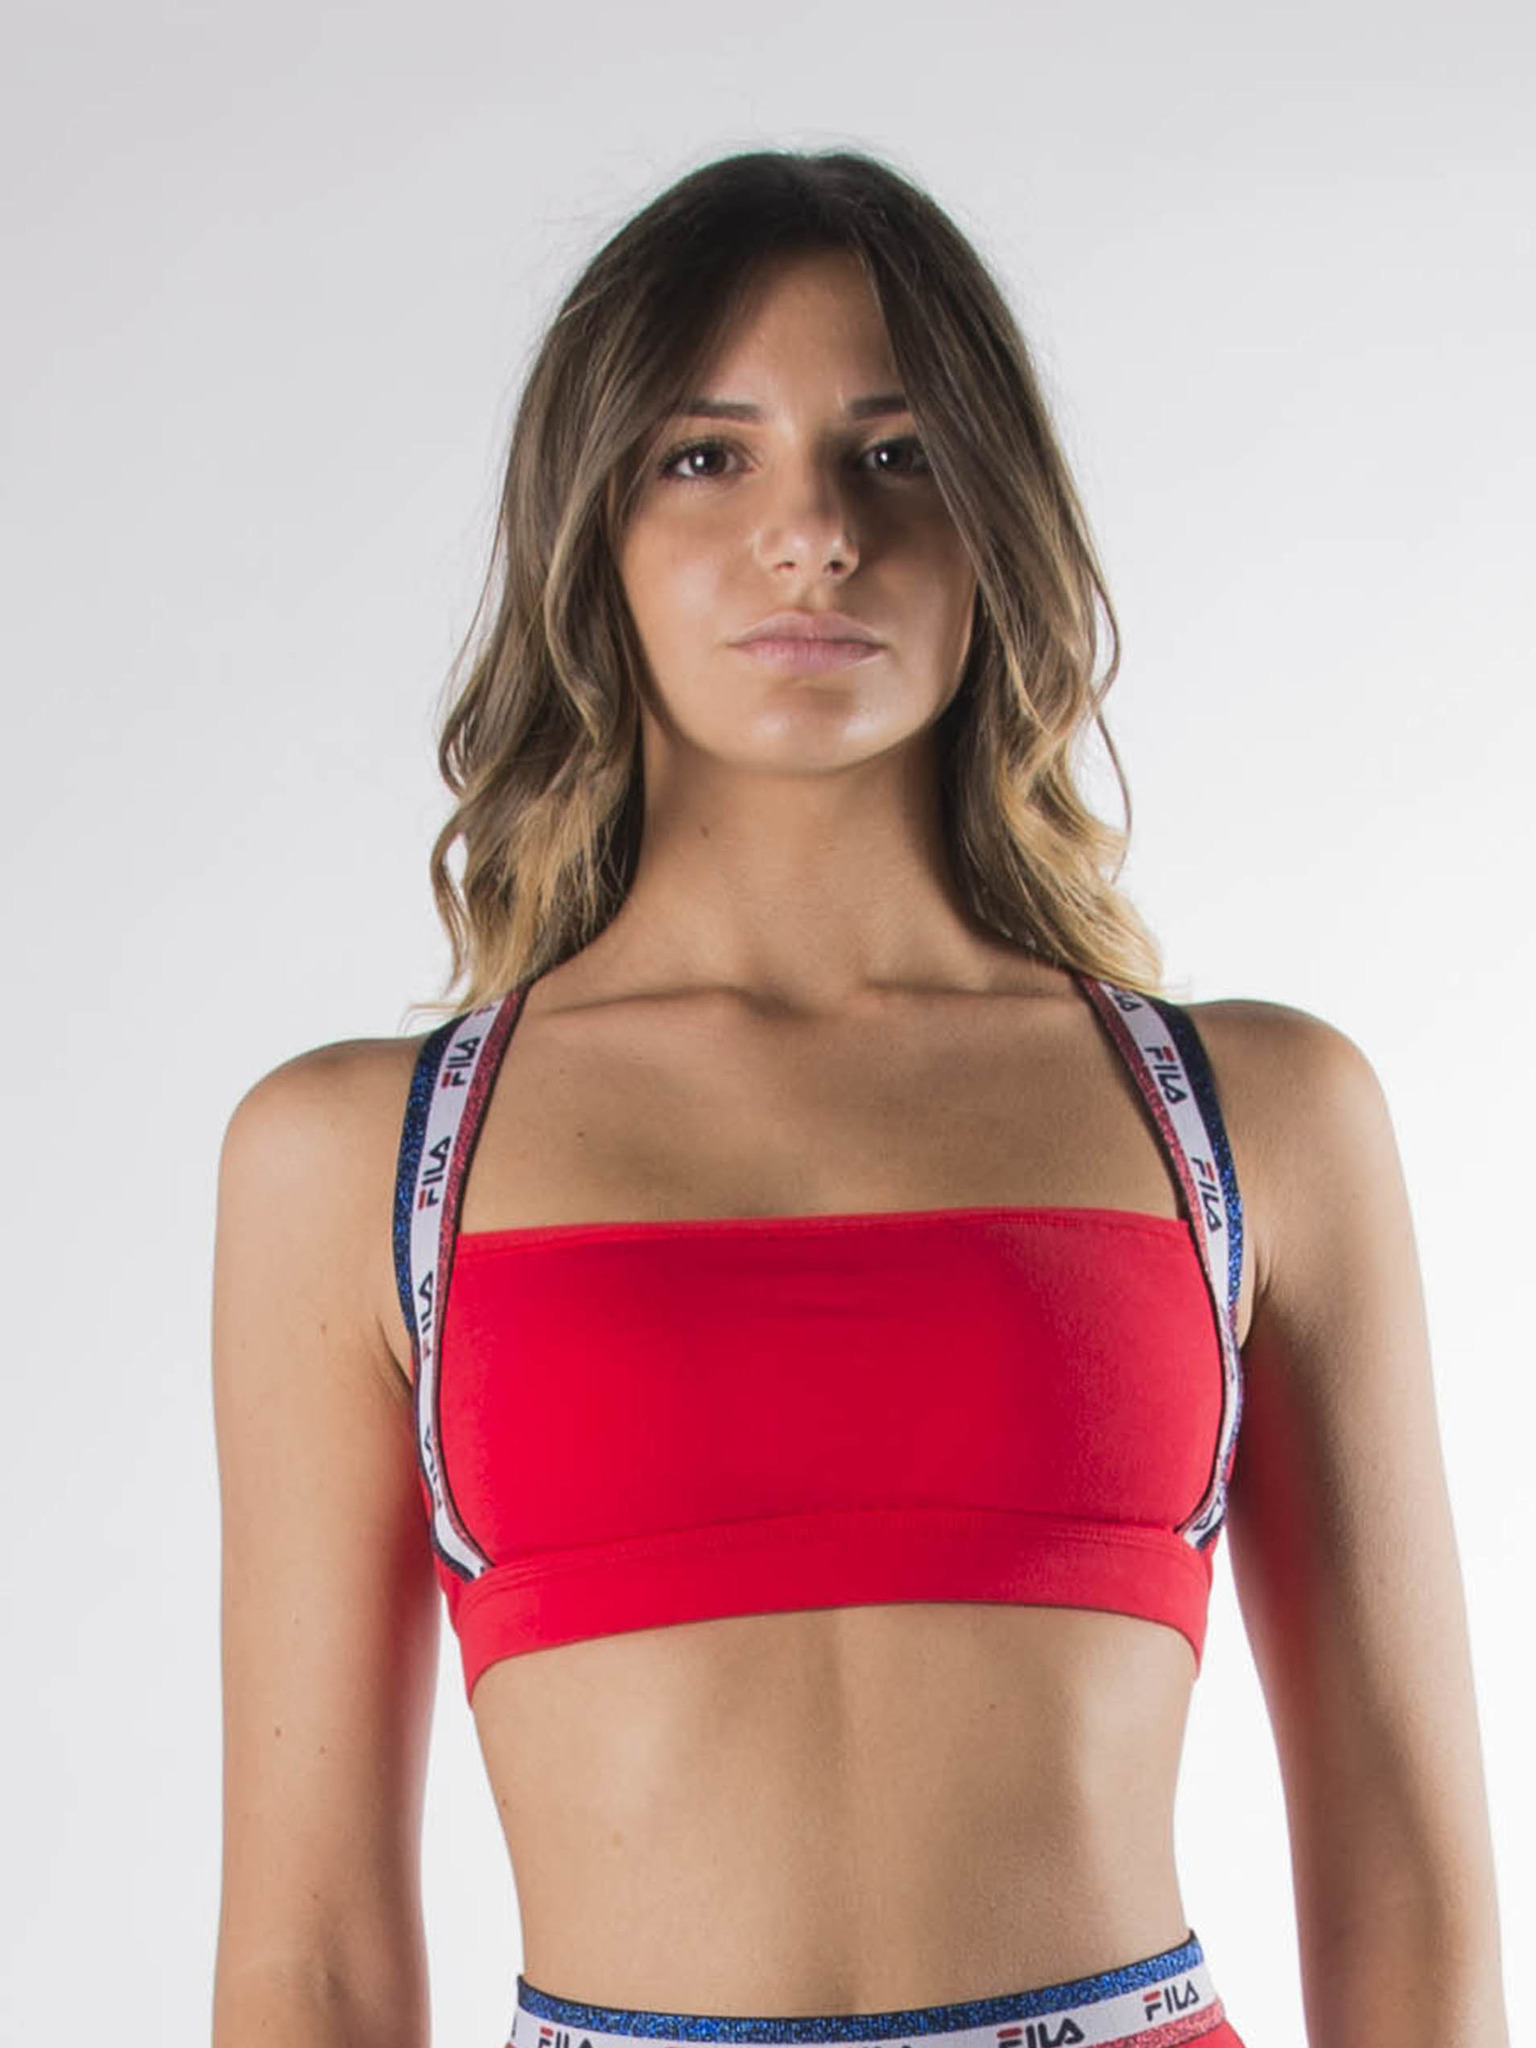 FILA Women's High Neck, Racer Back Sports Bra, Chinese Red, XS at